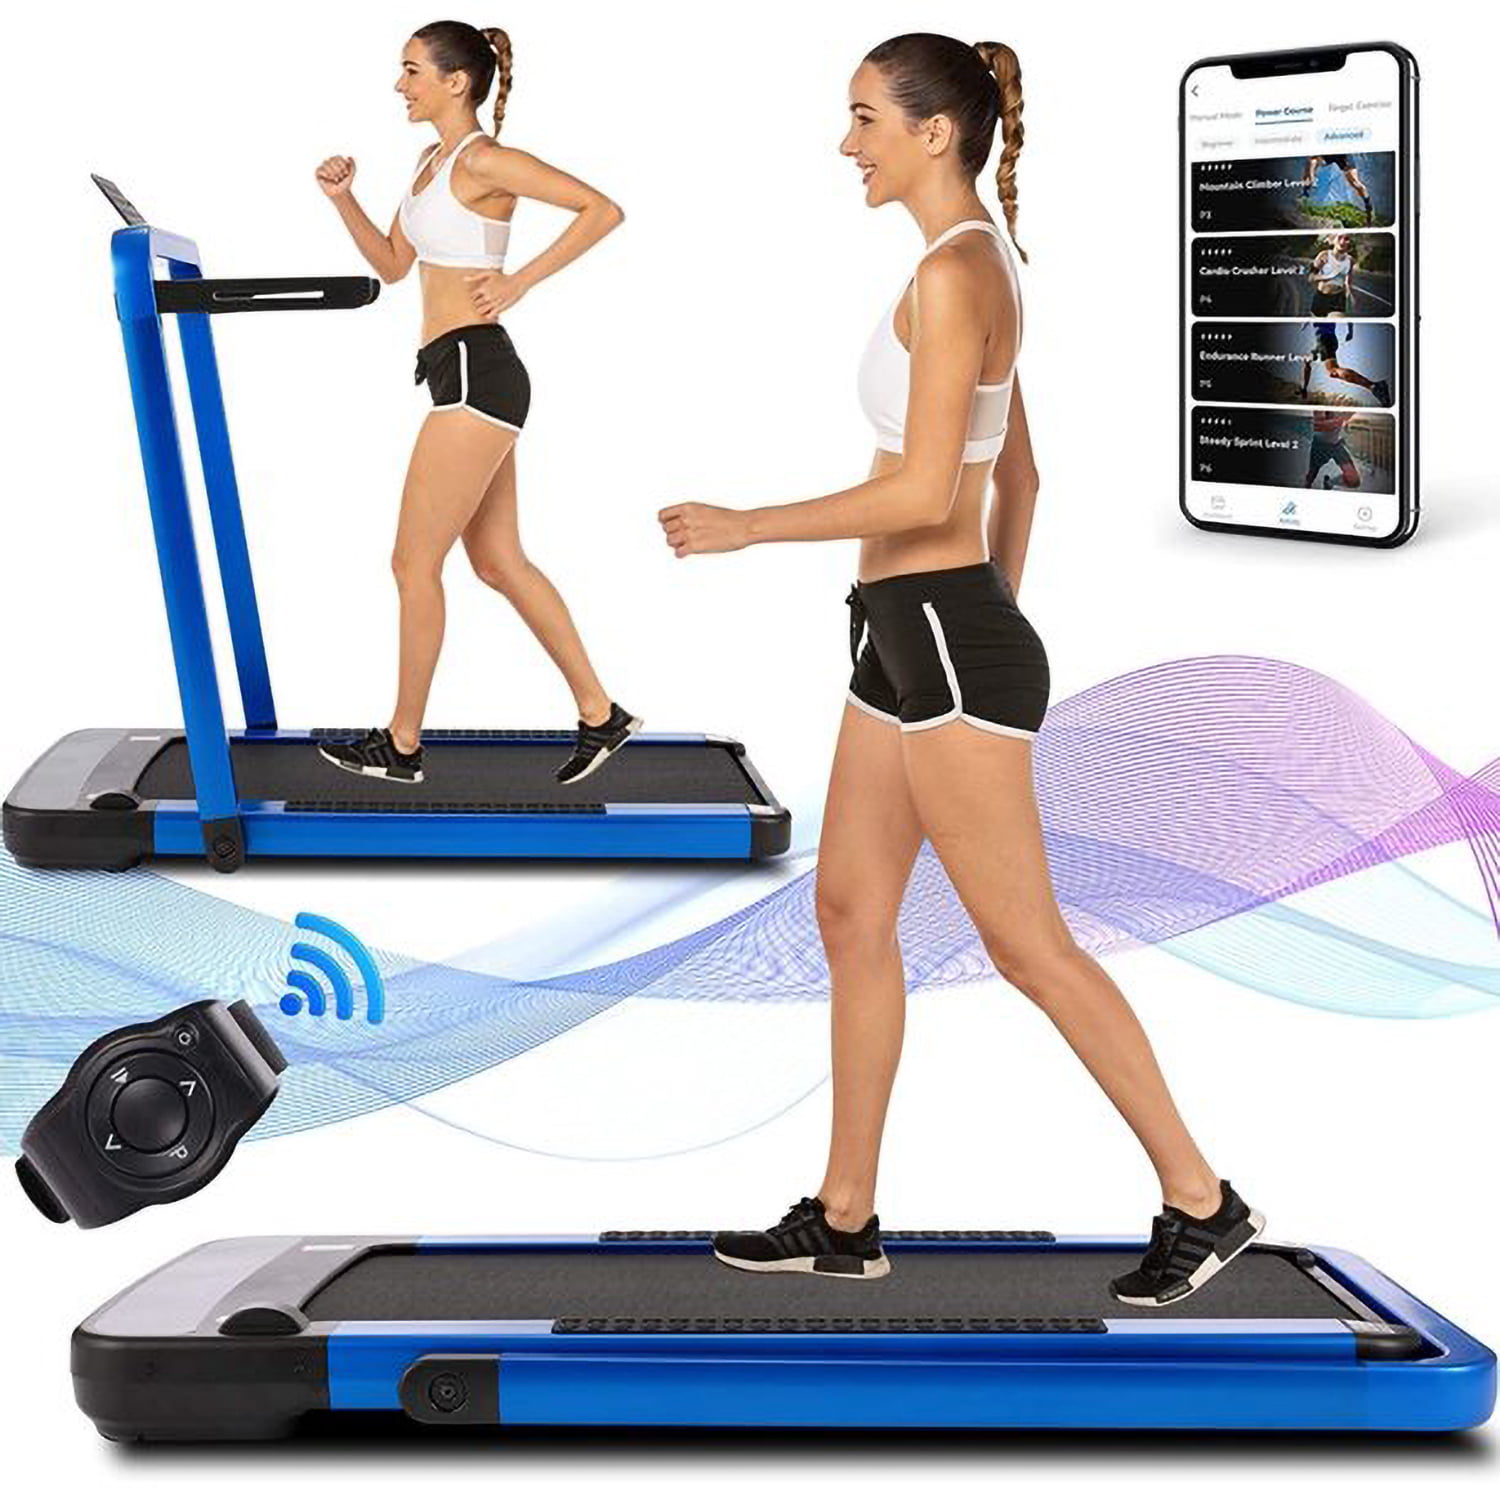 Folding Treadmills with Desk and Bluetooth Speaker Portable Electric Treadmill Machine for Running Walking Jogging Workout FUNMILY Treadmill for Home 265 LBS Weight Capacity M0513 